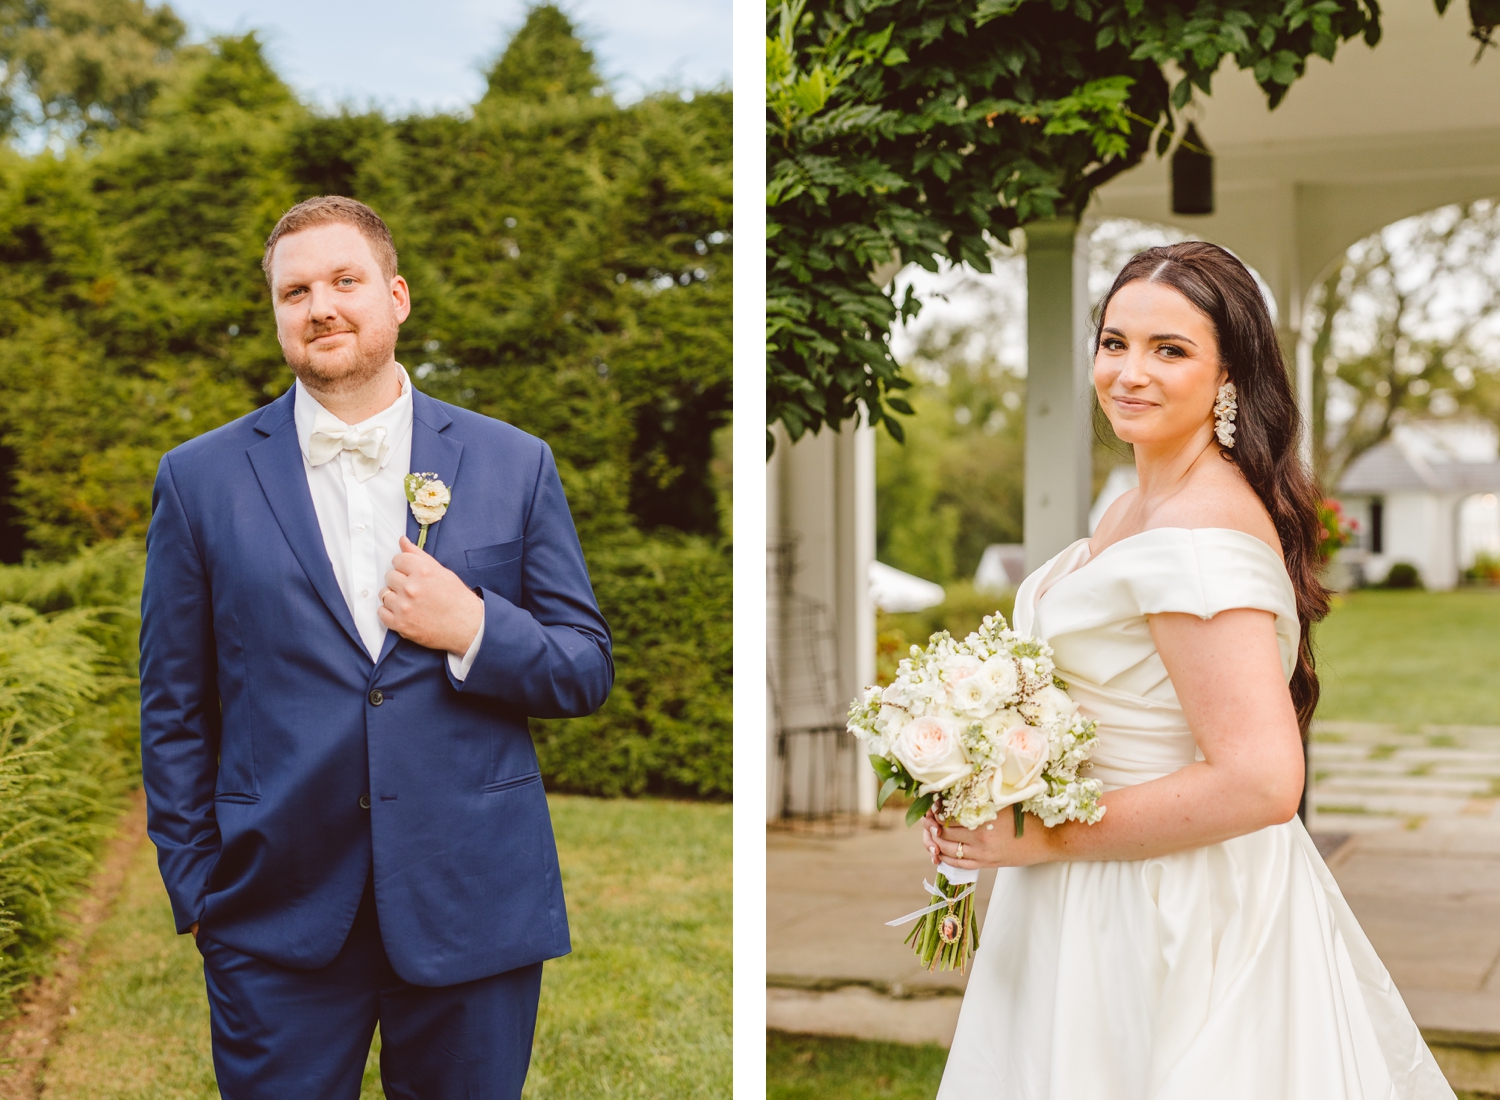 Groom wearing blue suit while standing in Ladew Topiary Gardens | Bride holding white and pale pink bouquet while standing in Ladew Topiary Gardens | Brooke Michelle Photo